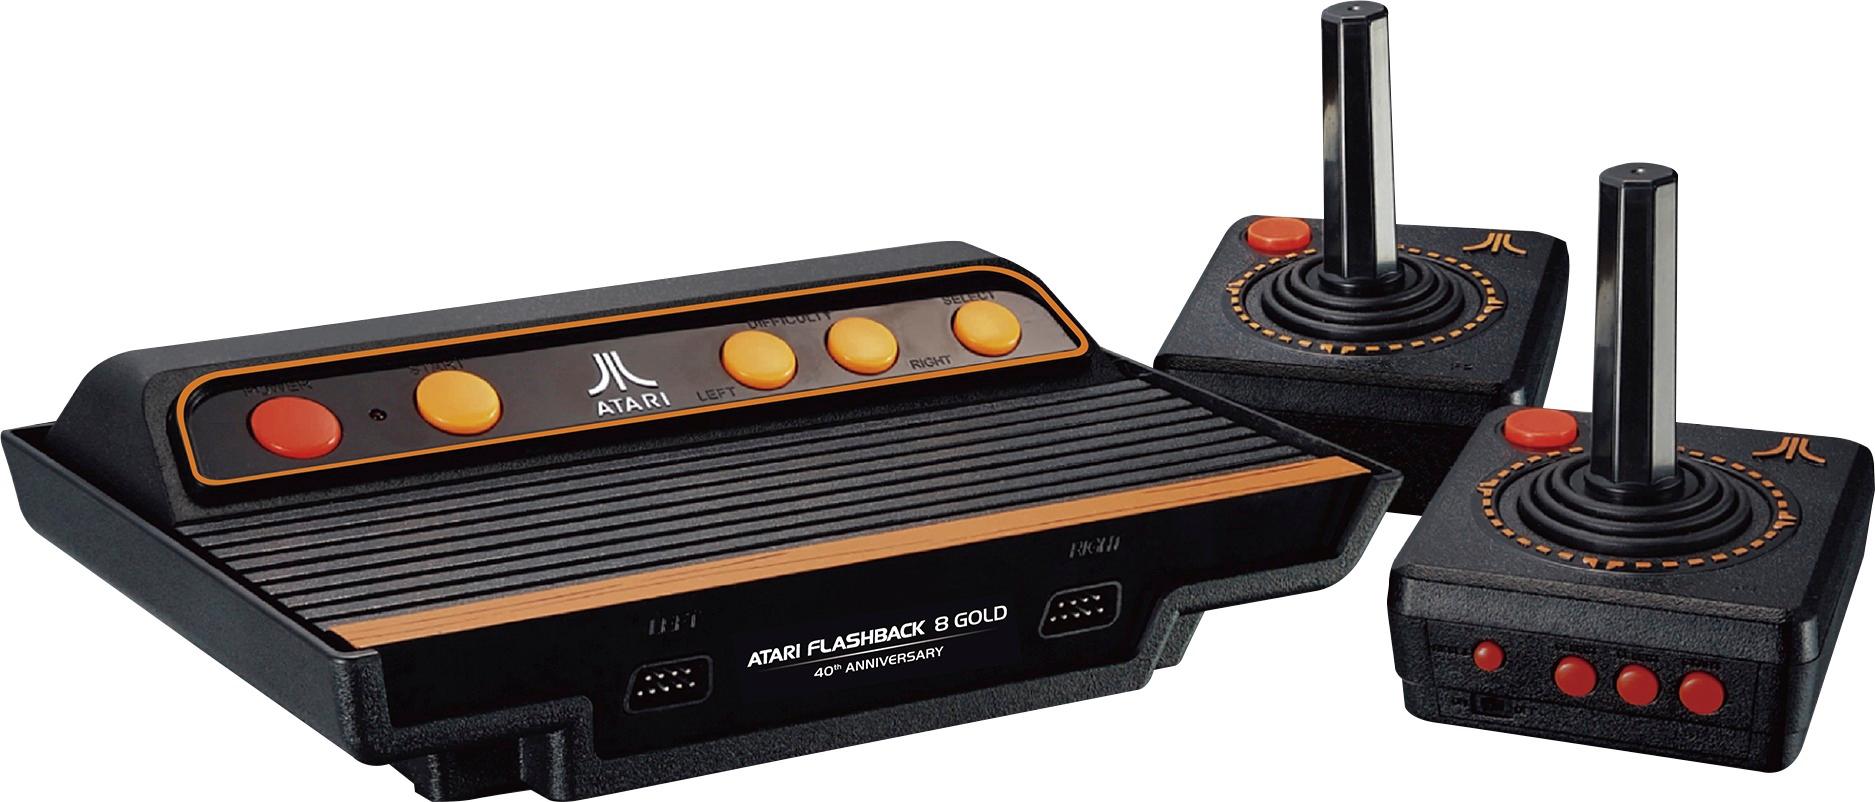 where can i buy an atari game system